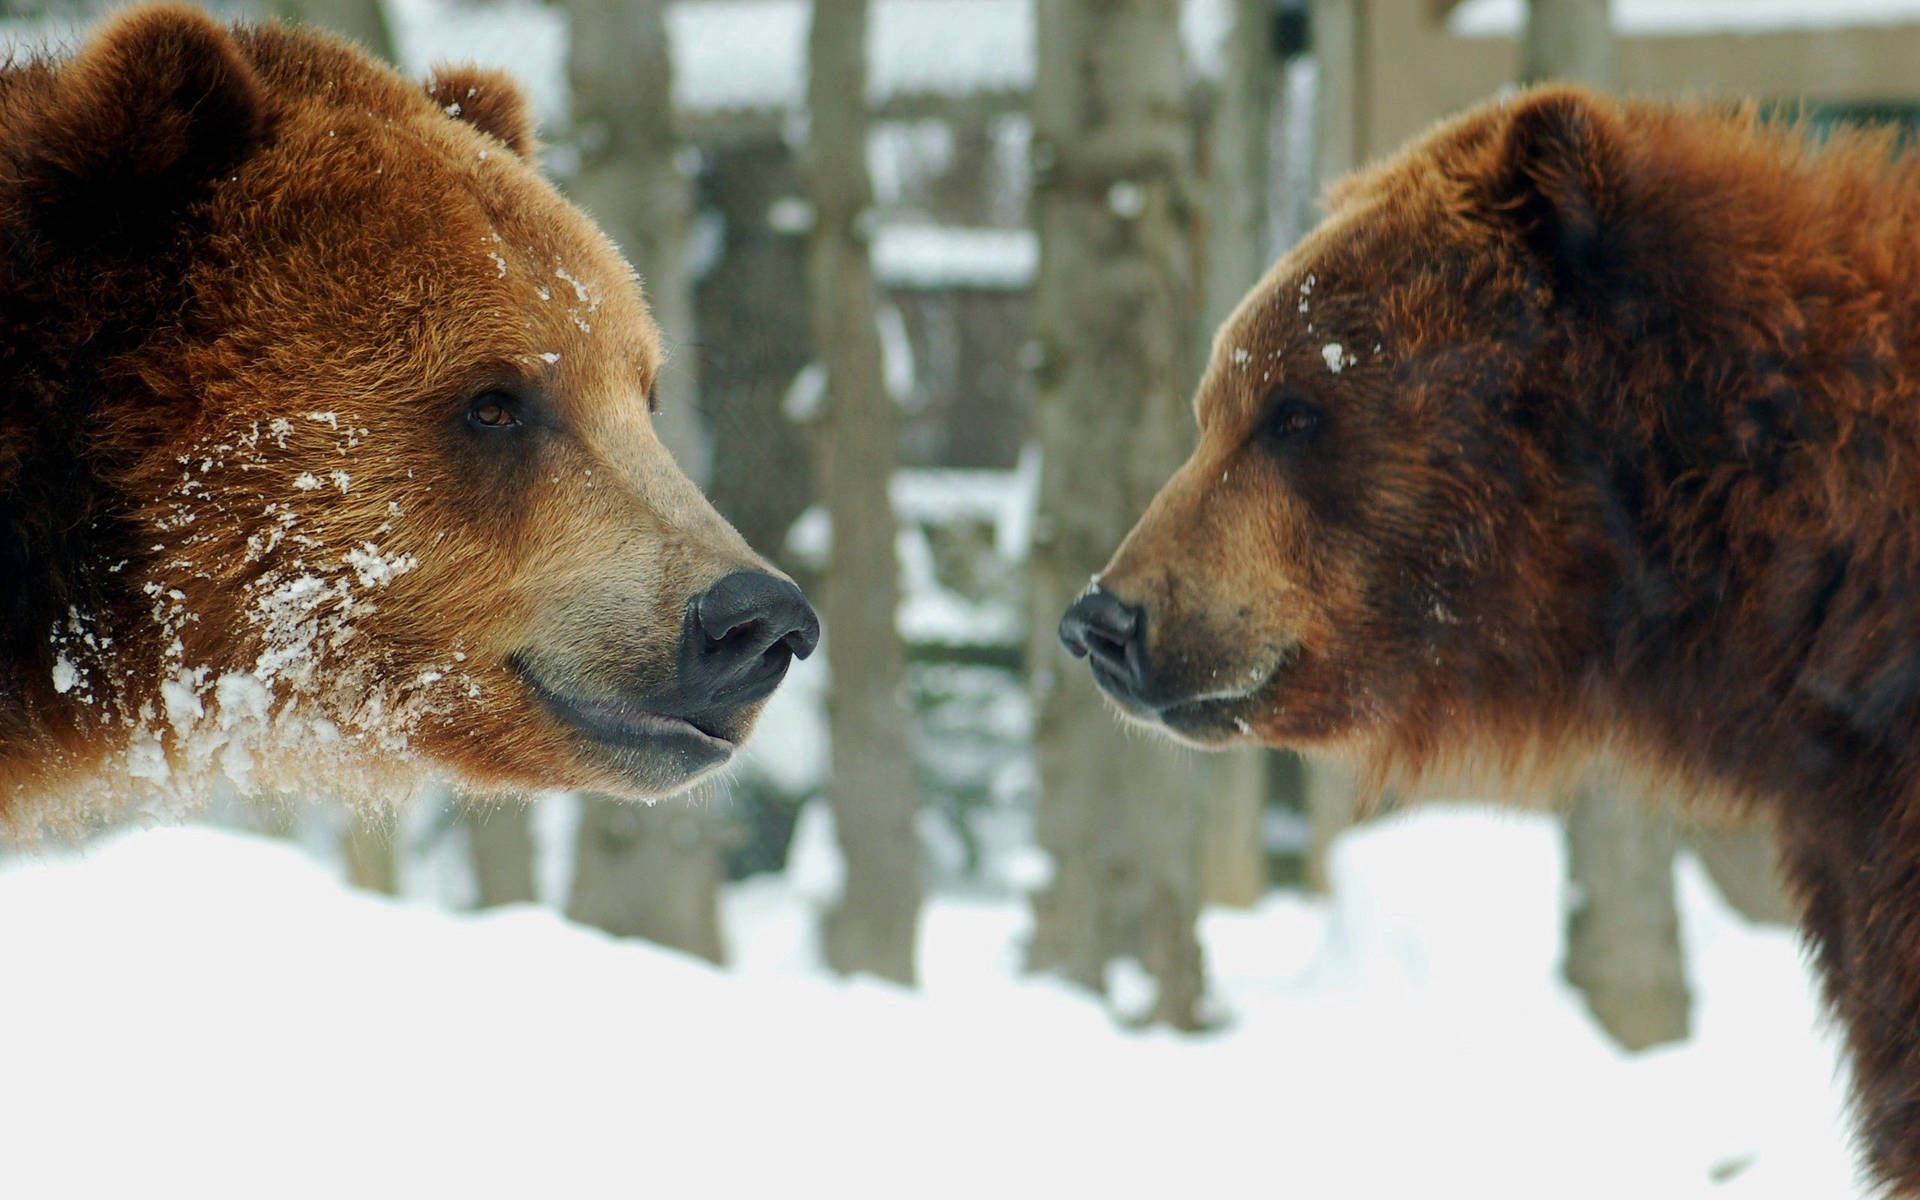 Two brown bears - A picture of two brown bears peacefully walking in their natural habitat. Wallpaper